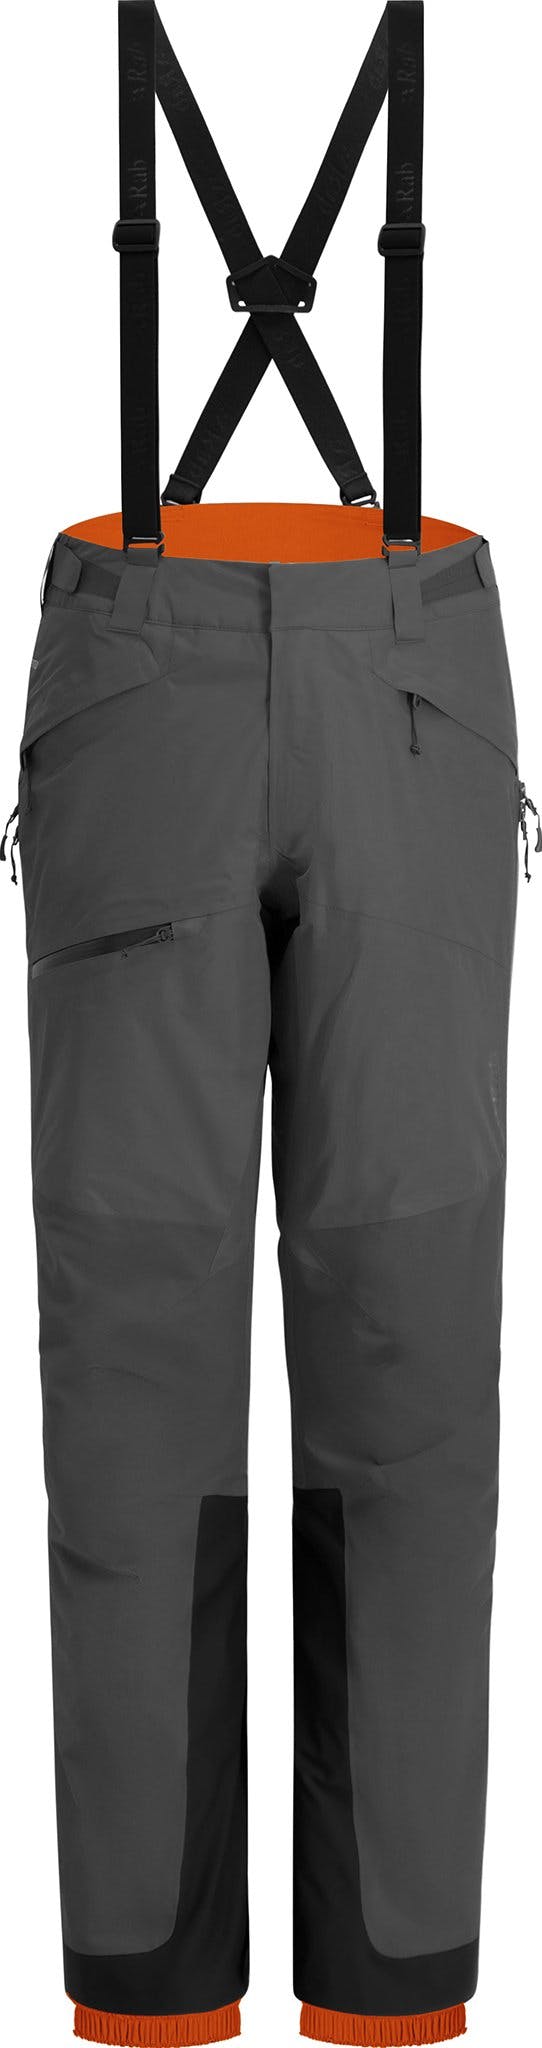 Product image for Khroma Volition Pants - Men's